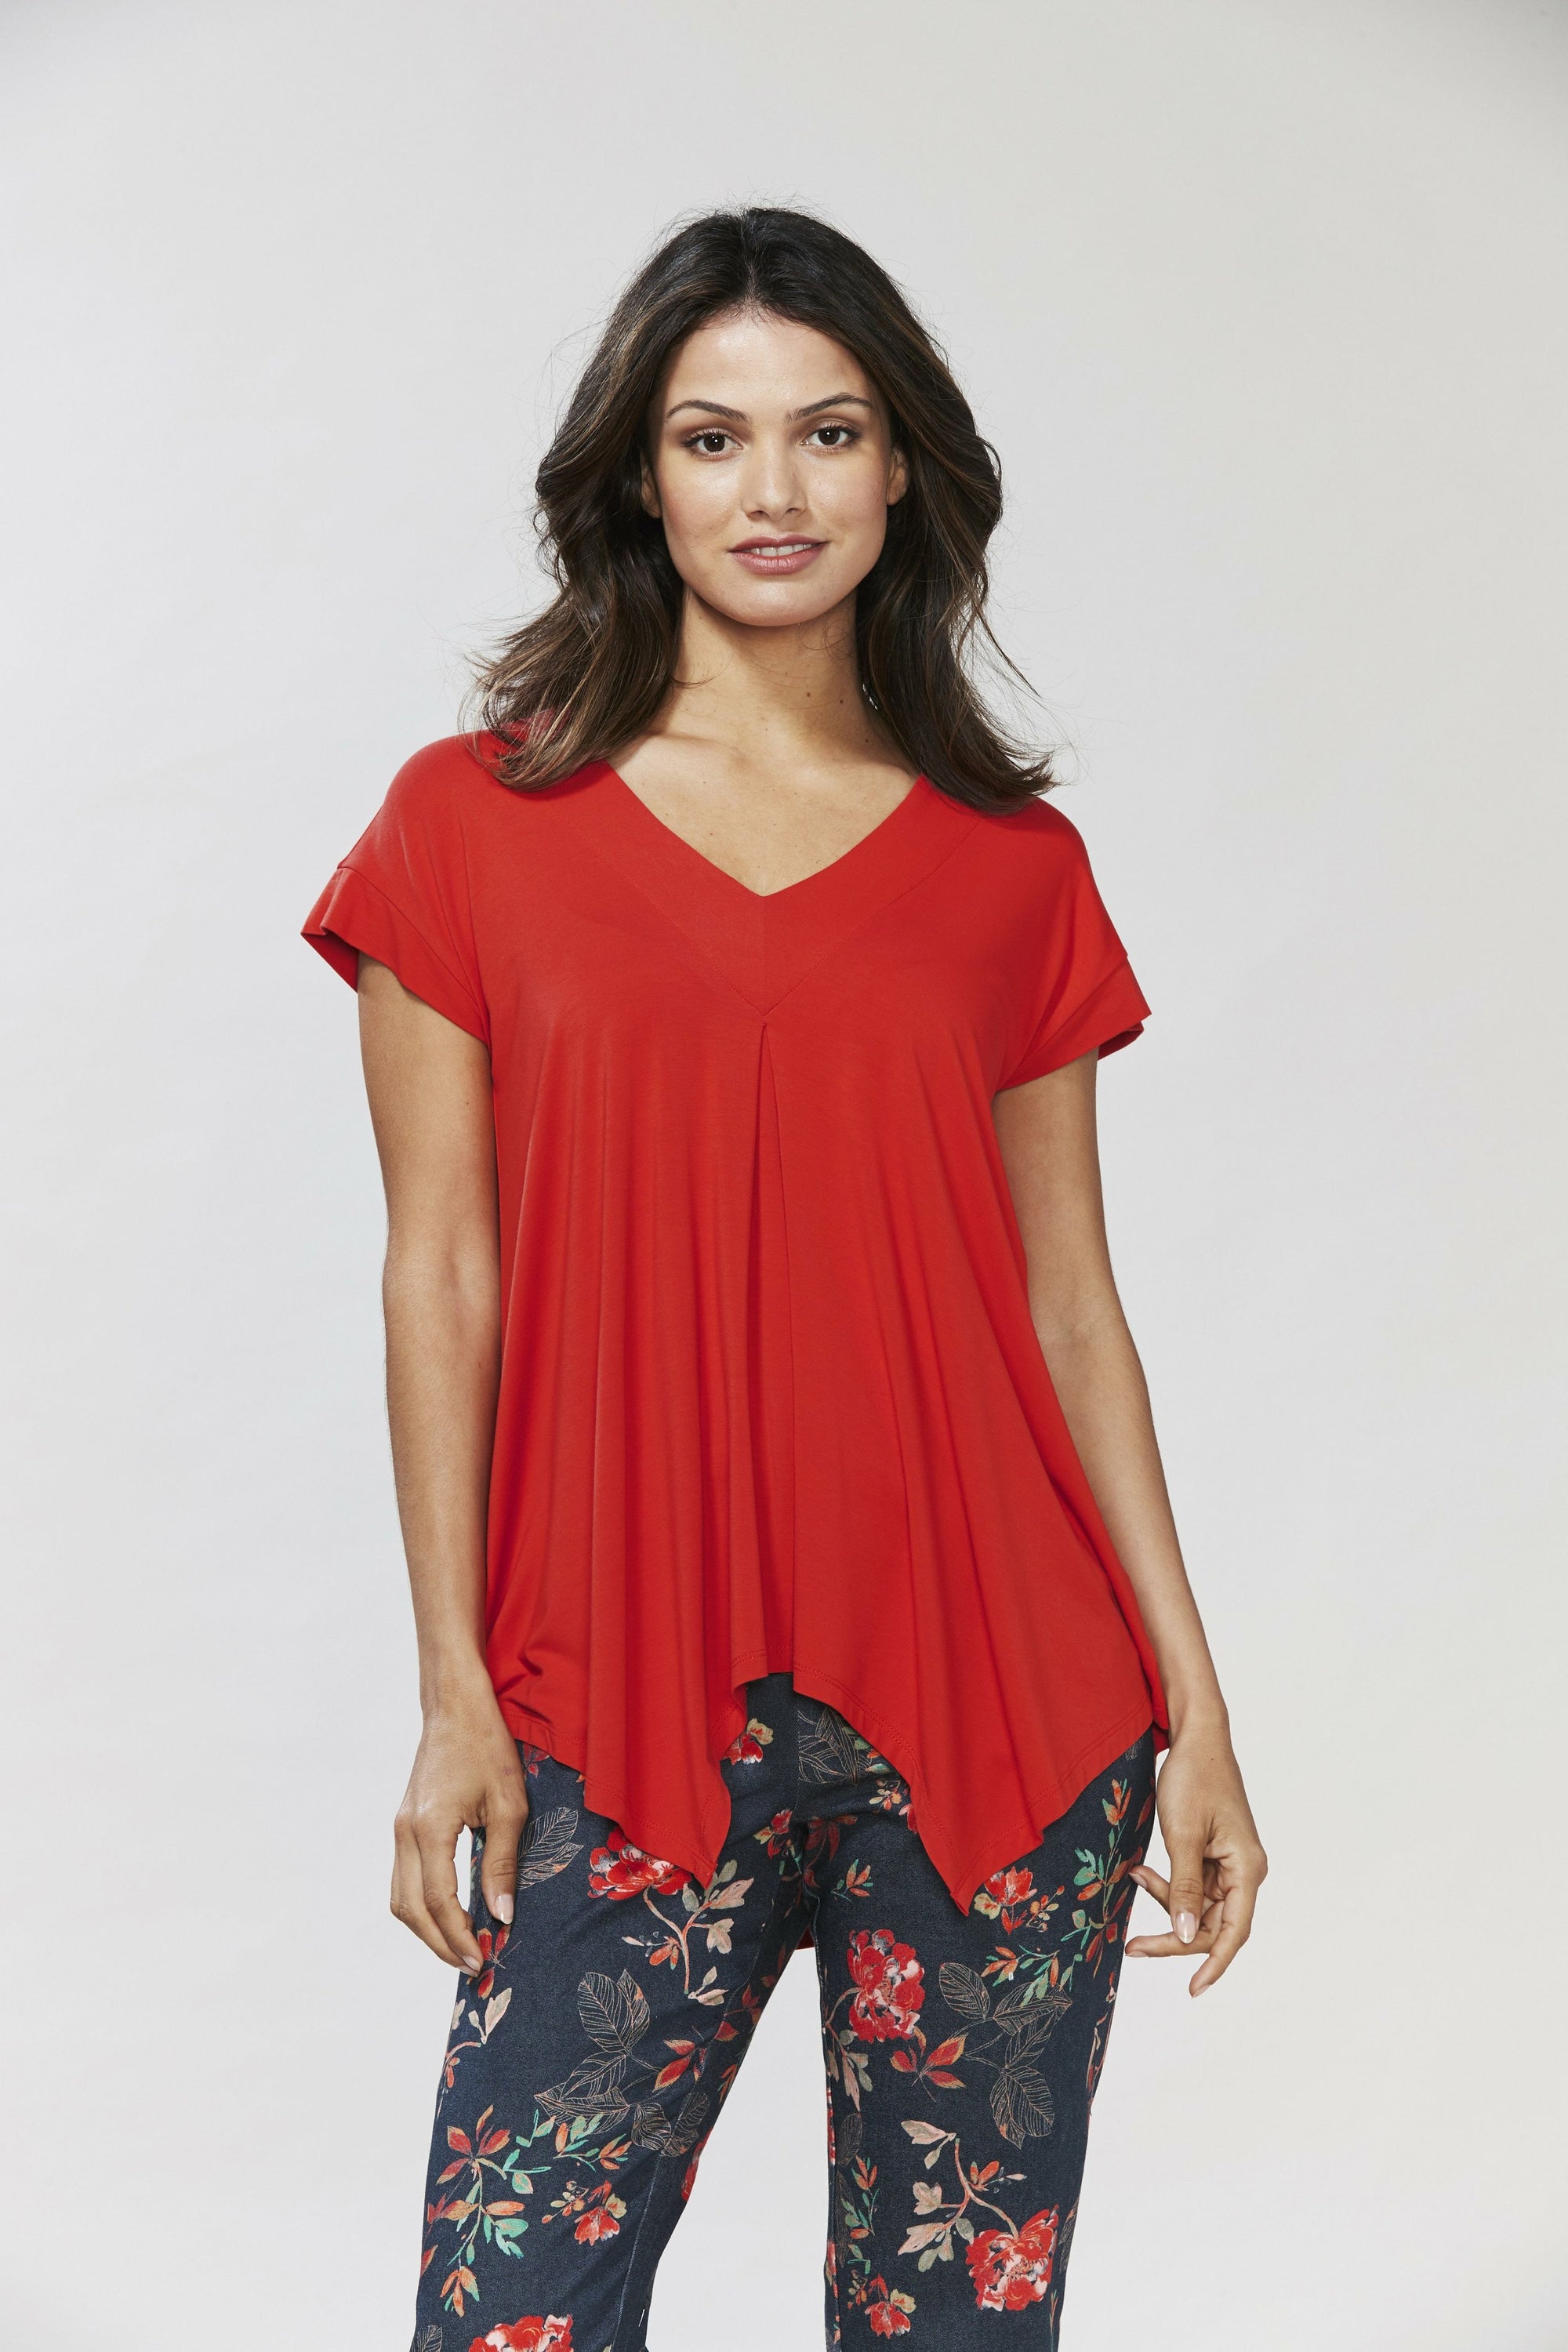 Newport Collection Jenna Swing top in Sunset